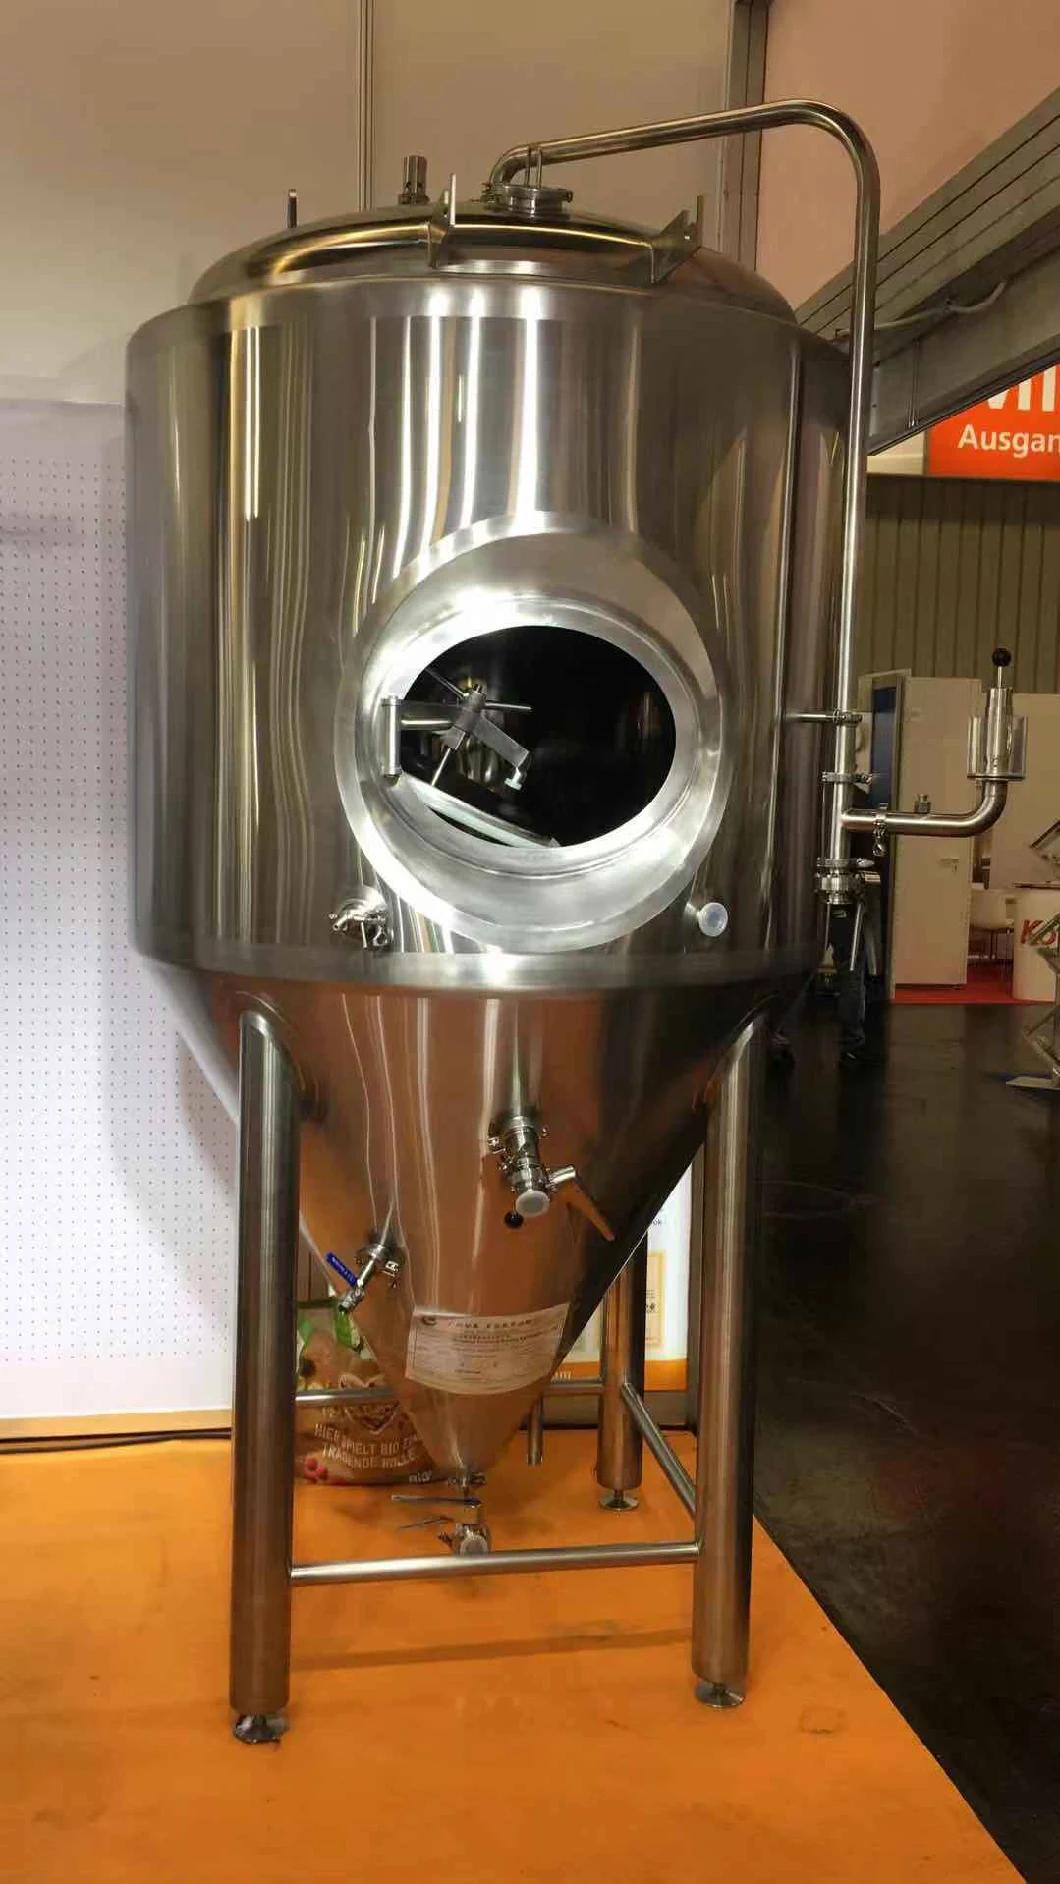 1000L 2000L 3000L Beer Brewing Machine Made in China Use for Beer Brewery